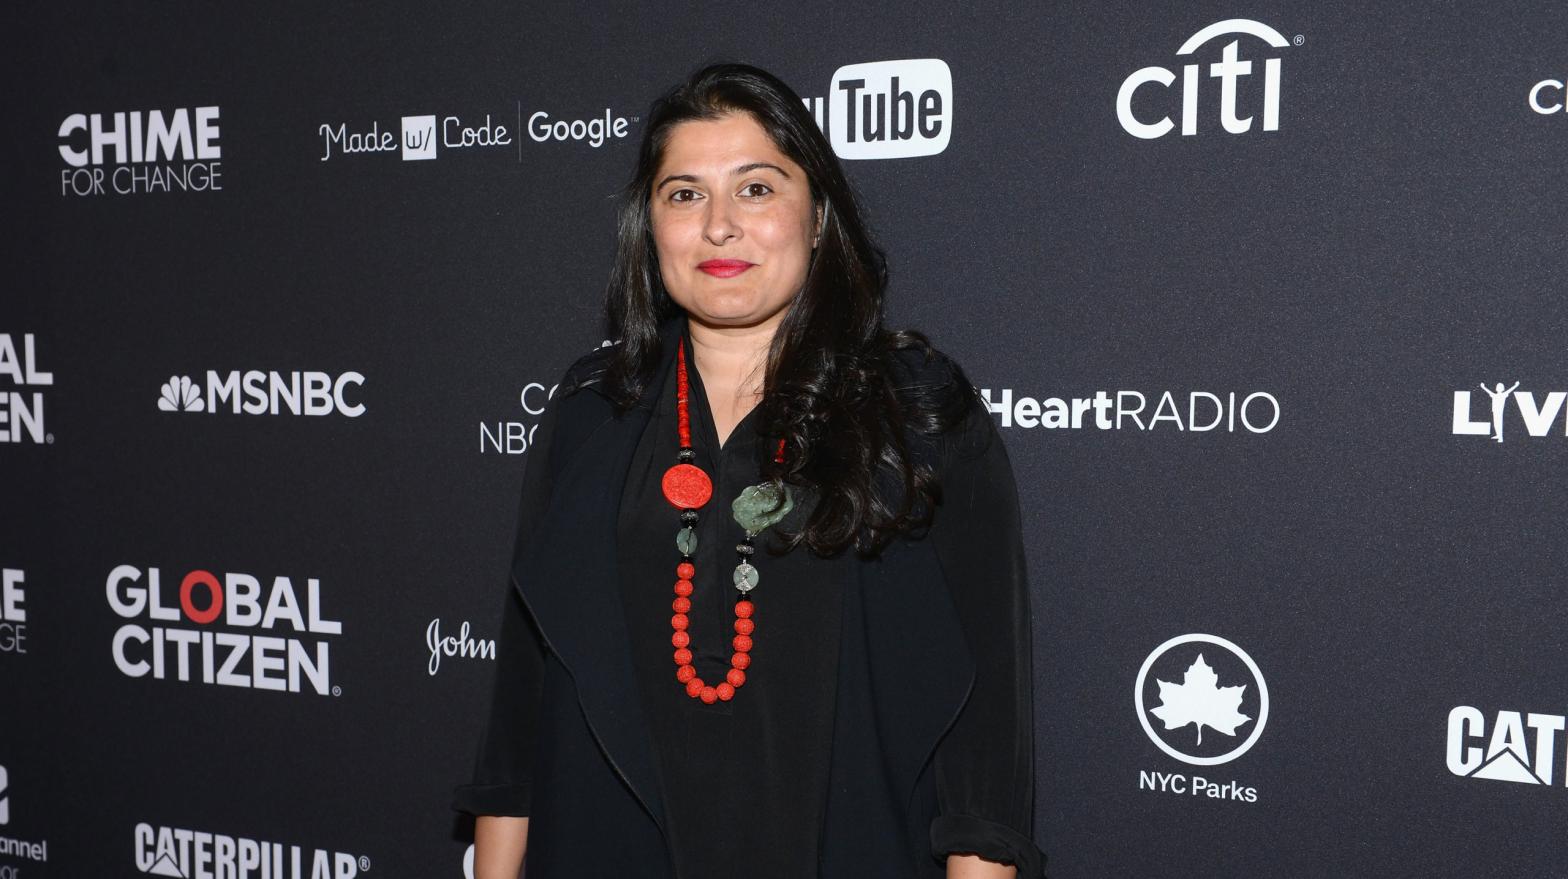 Sharmeen Obaid-Chinoy in 2016.  (Photo: Noam Galai, Getty Images)